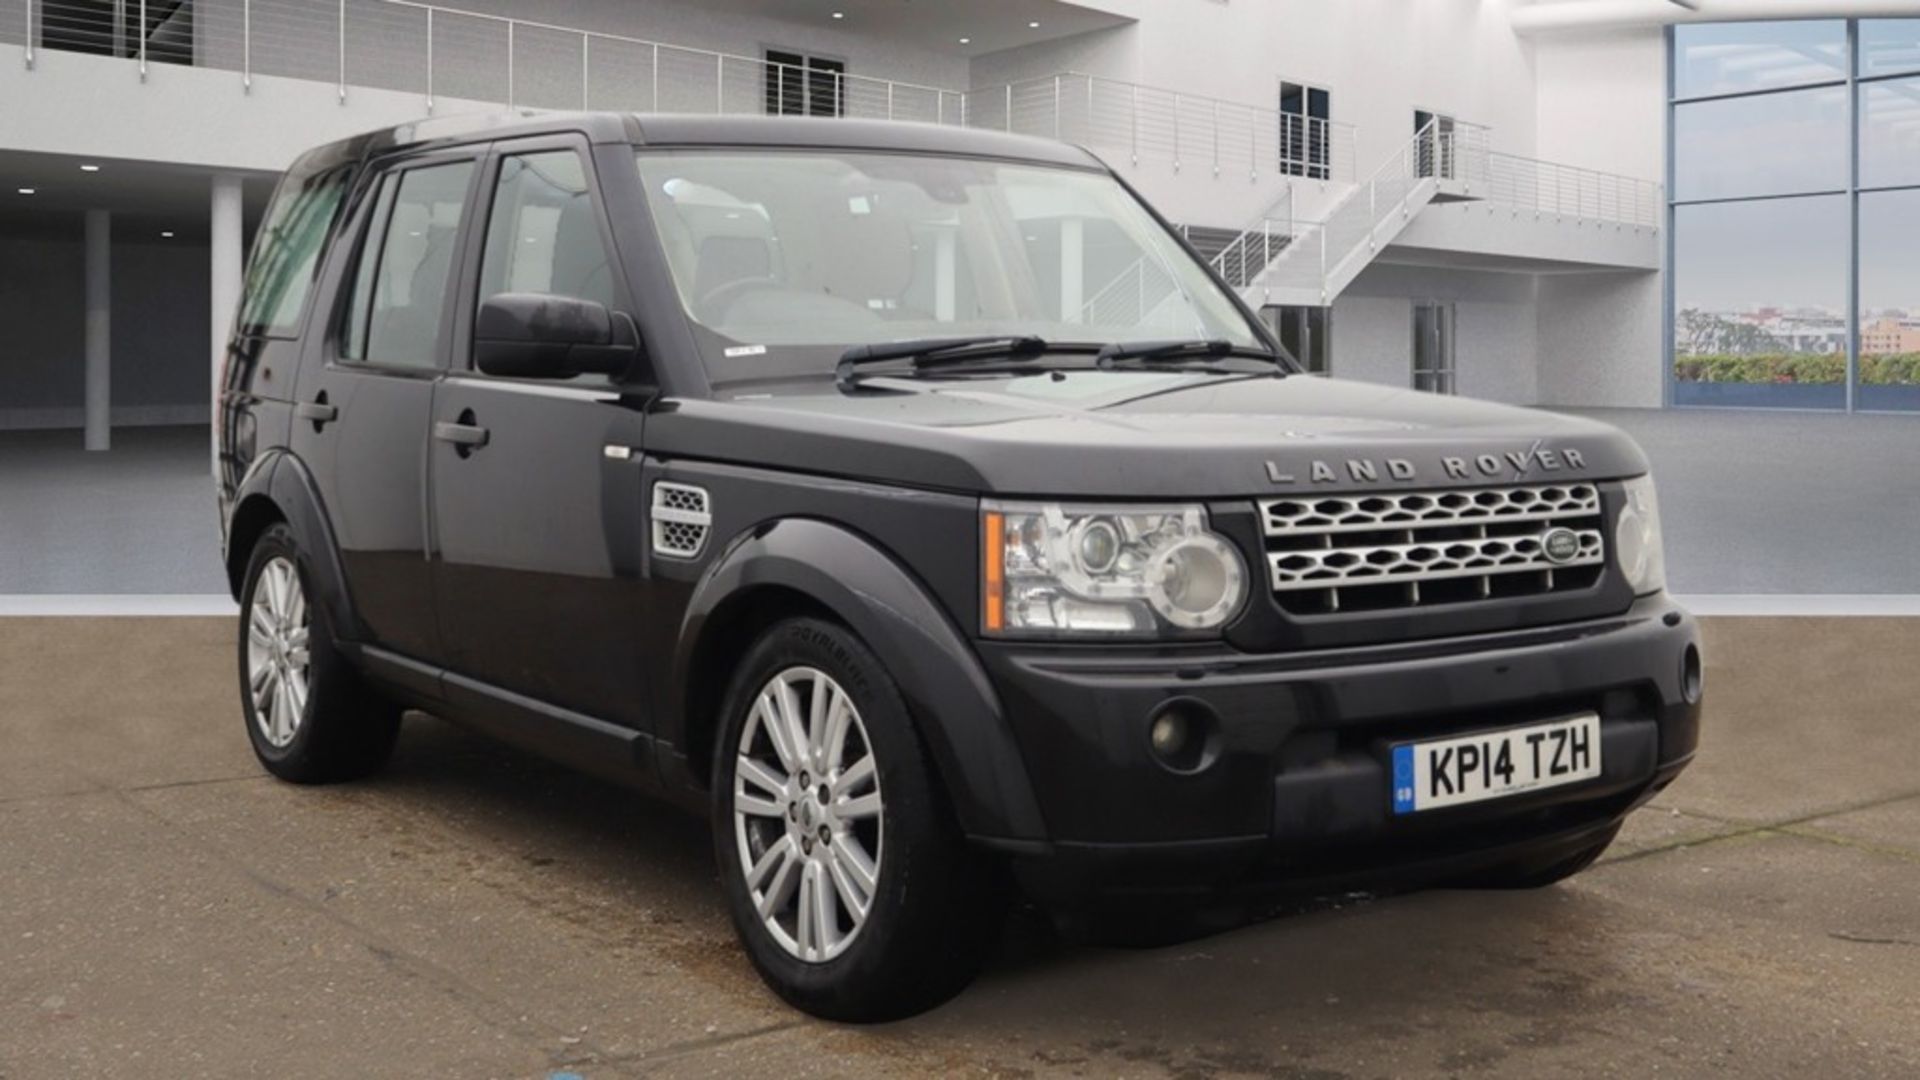 ** ON SALE **Land Rover Discovery 4 255 GS 3.0 SDV6 2014 '14 Reg' -Alloy Wheels -Parking Sensors